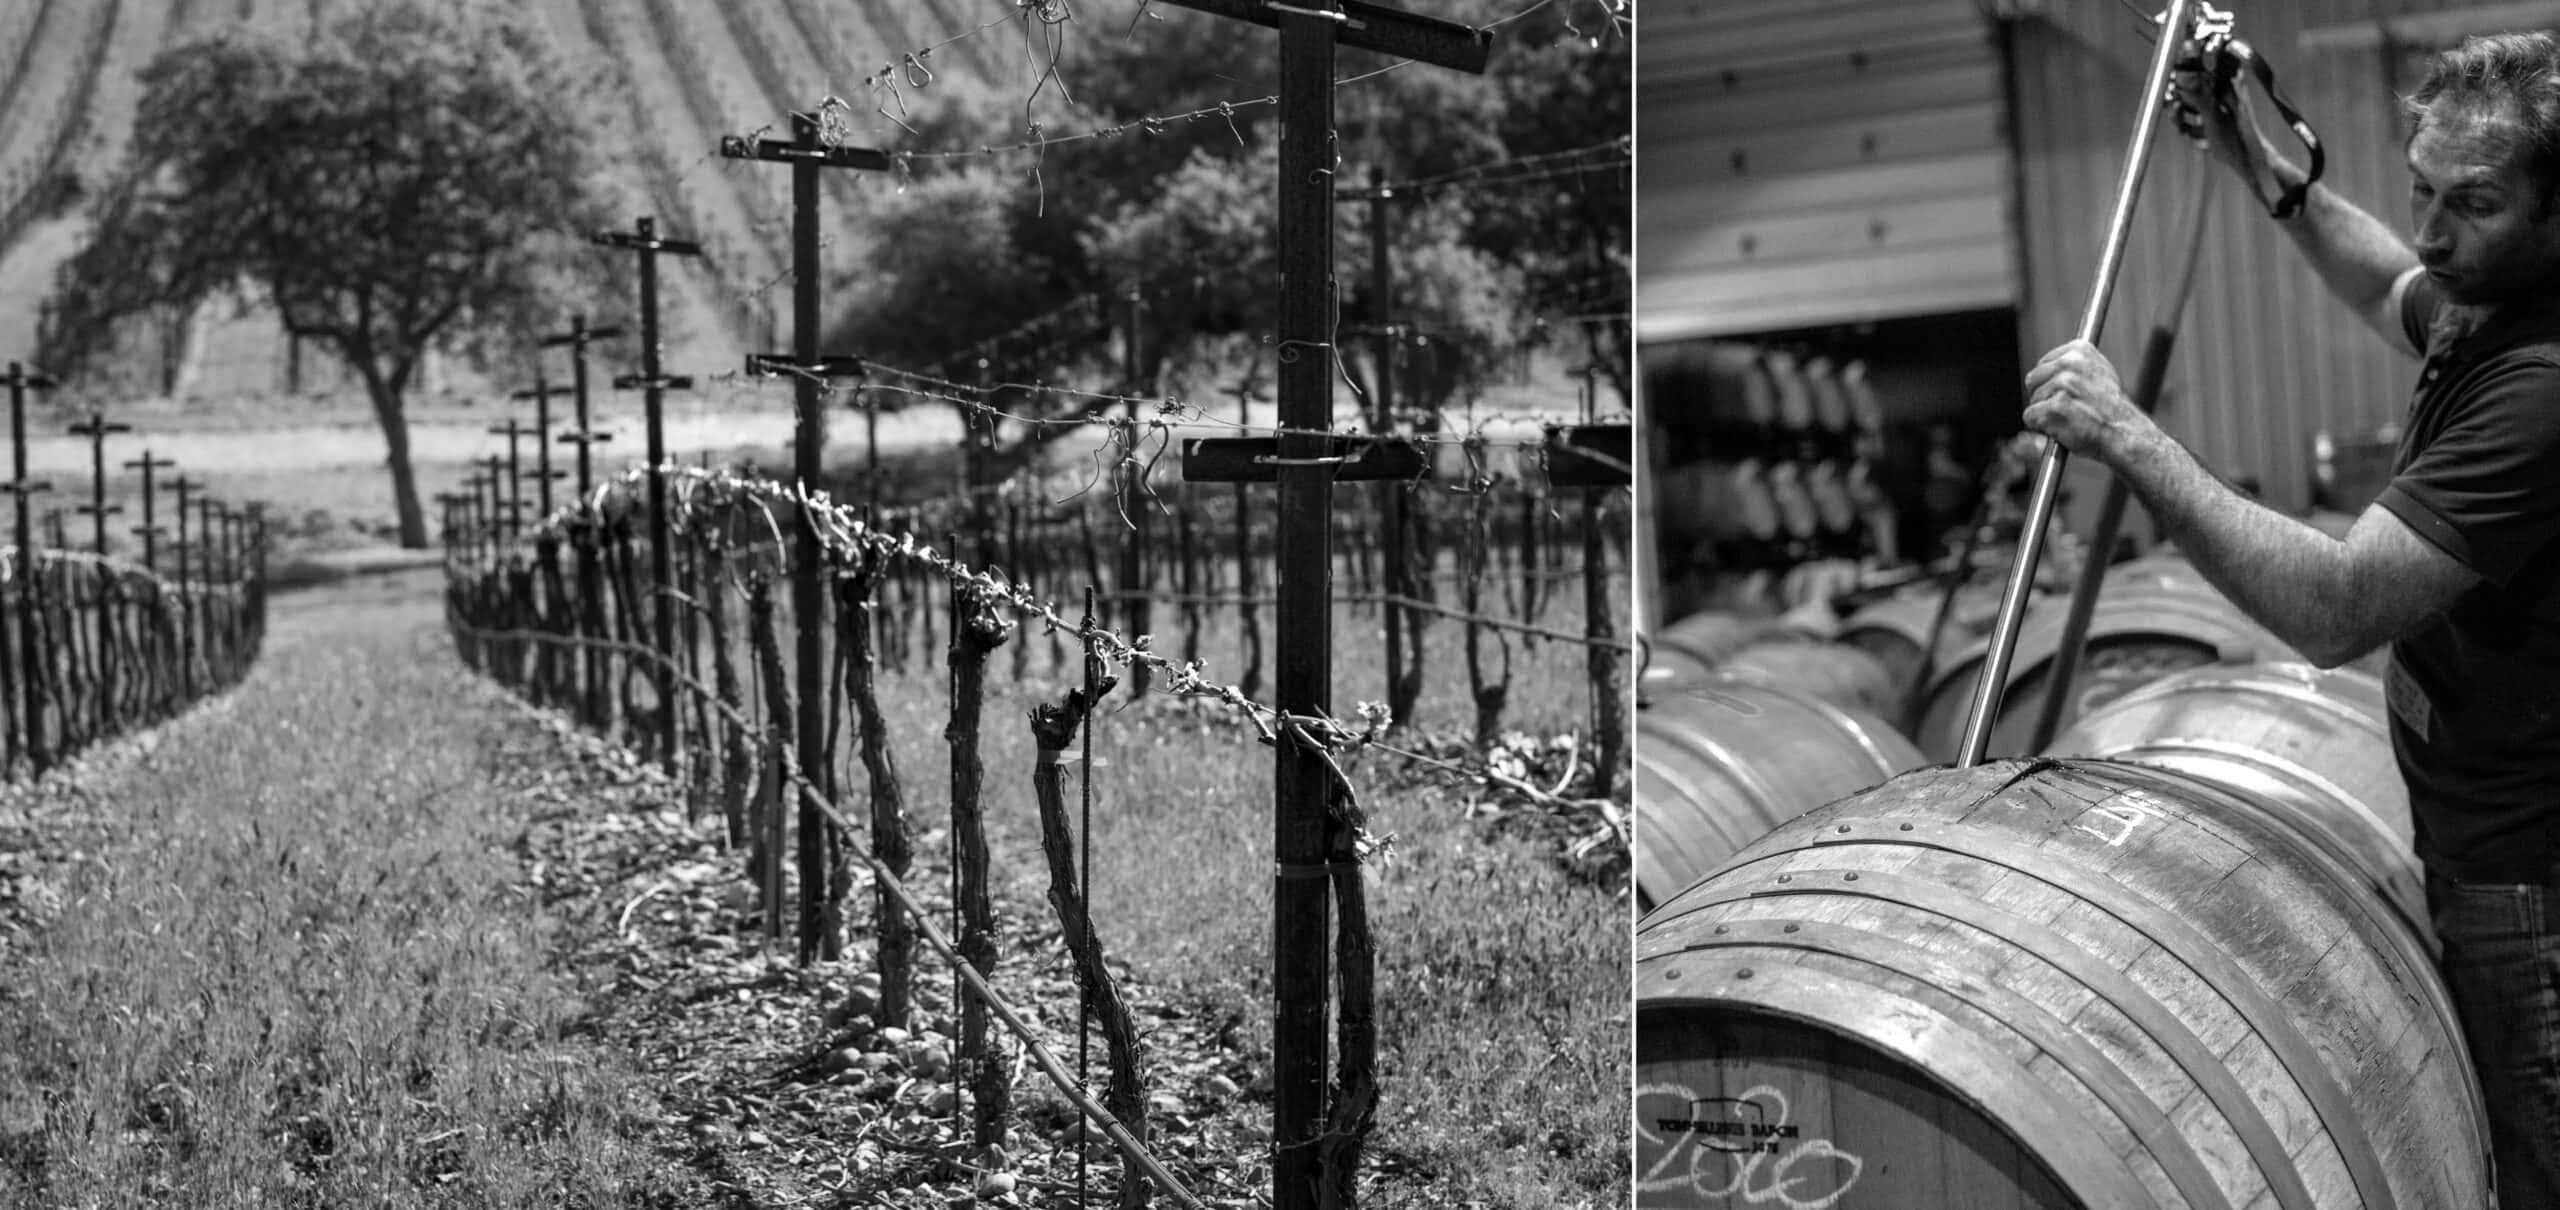 Two pictures: Left - A Paso Robles vineyard right: Guillaume Fabre with a wine barrel